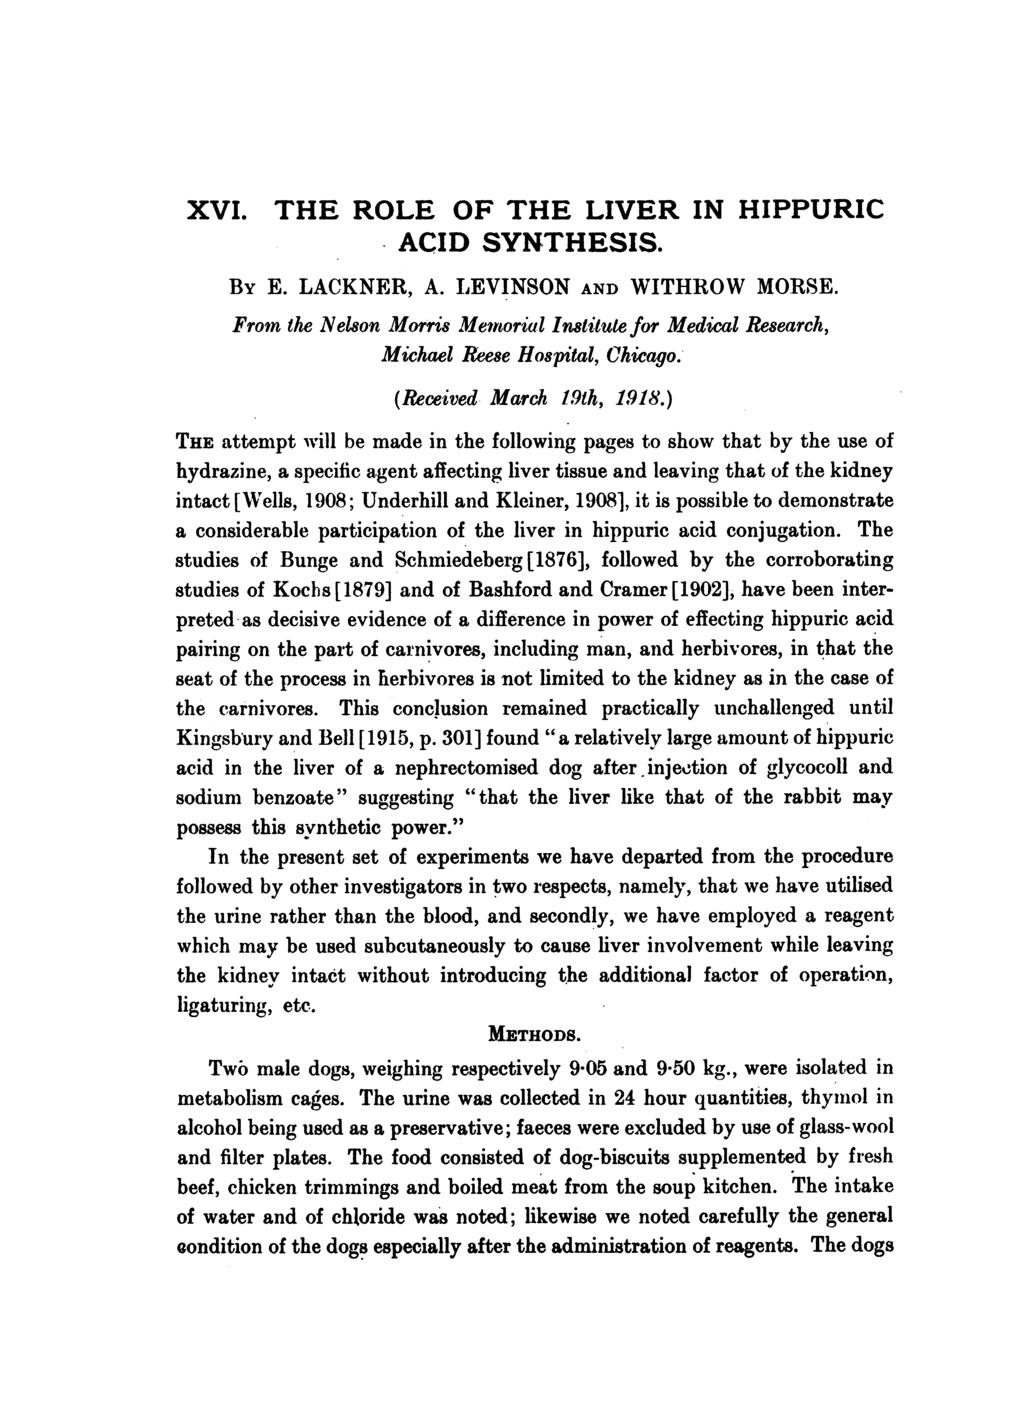 XVI. THE ROLE OF THE LIVER IN HIPPURIC ACID SYNTHESIS. BY E. LACKNER, A. LIEVINSON AND WITHROW MORSE. From the Nelson Morris Memorial Institute for Medical Research, Michael Reese Hospital, Chicago.